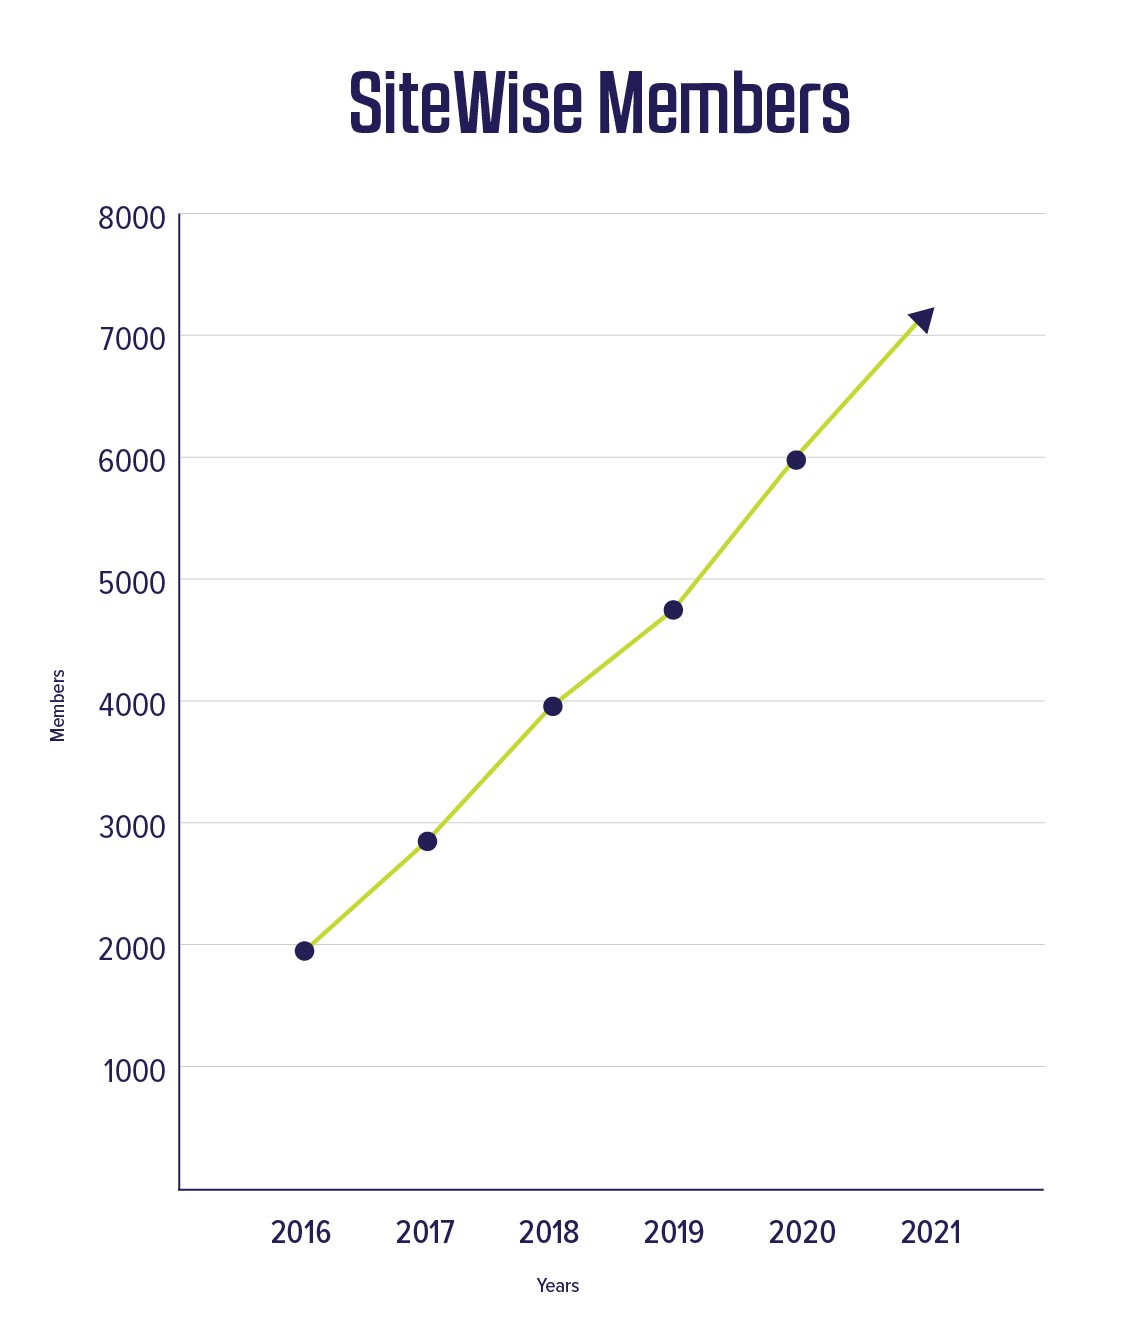 The growth of SiteWise since 2016